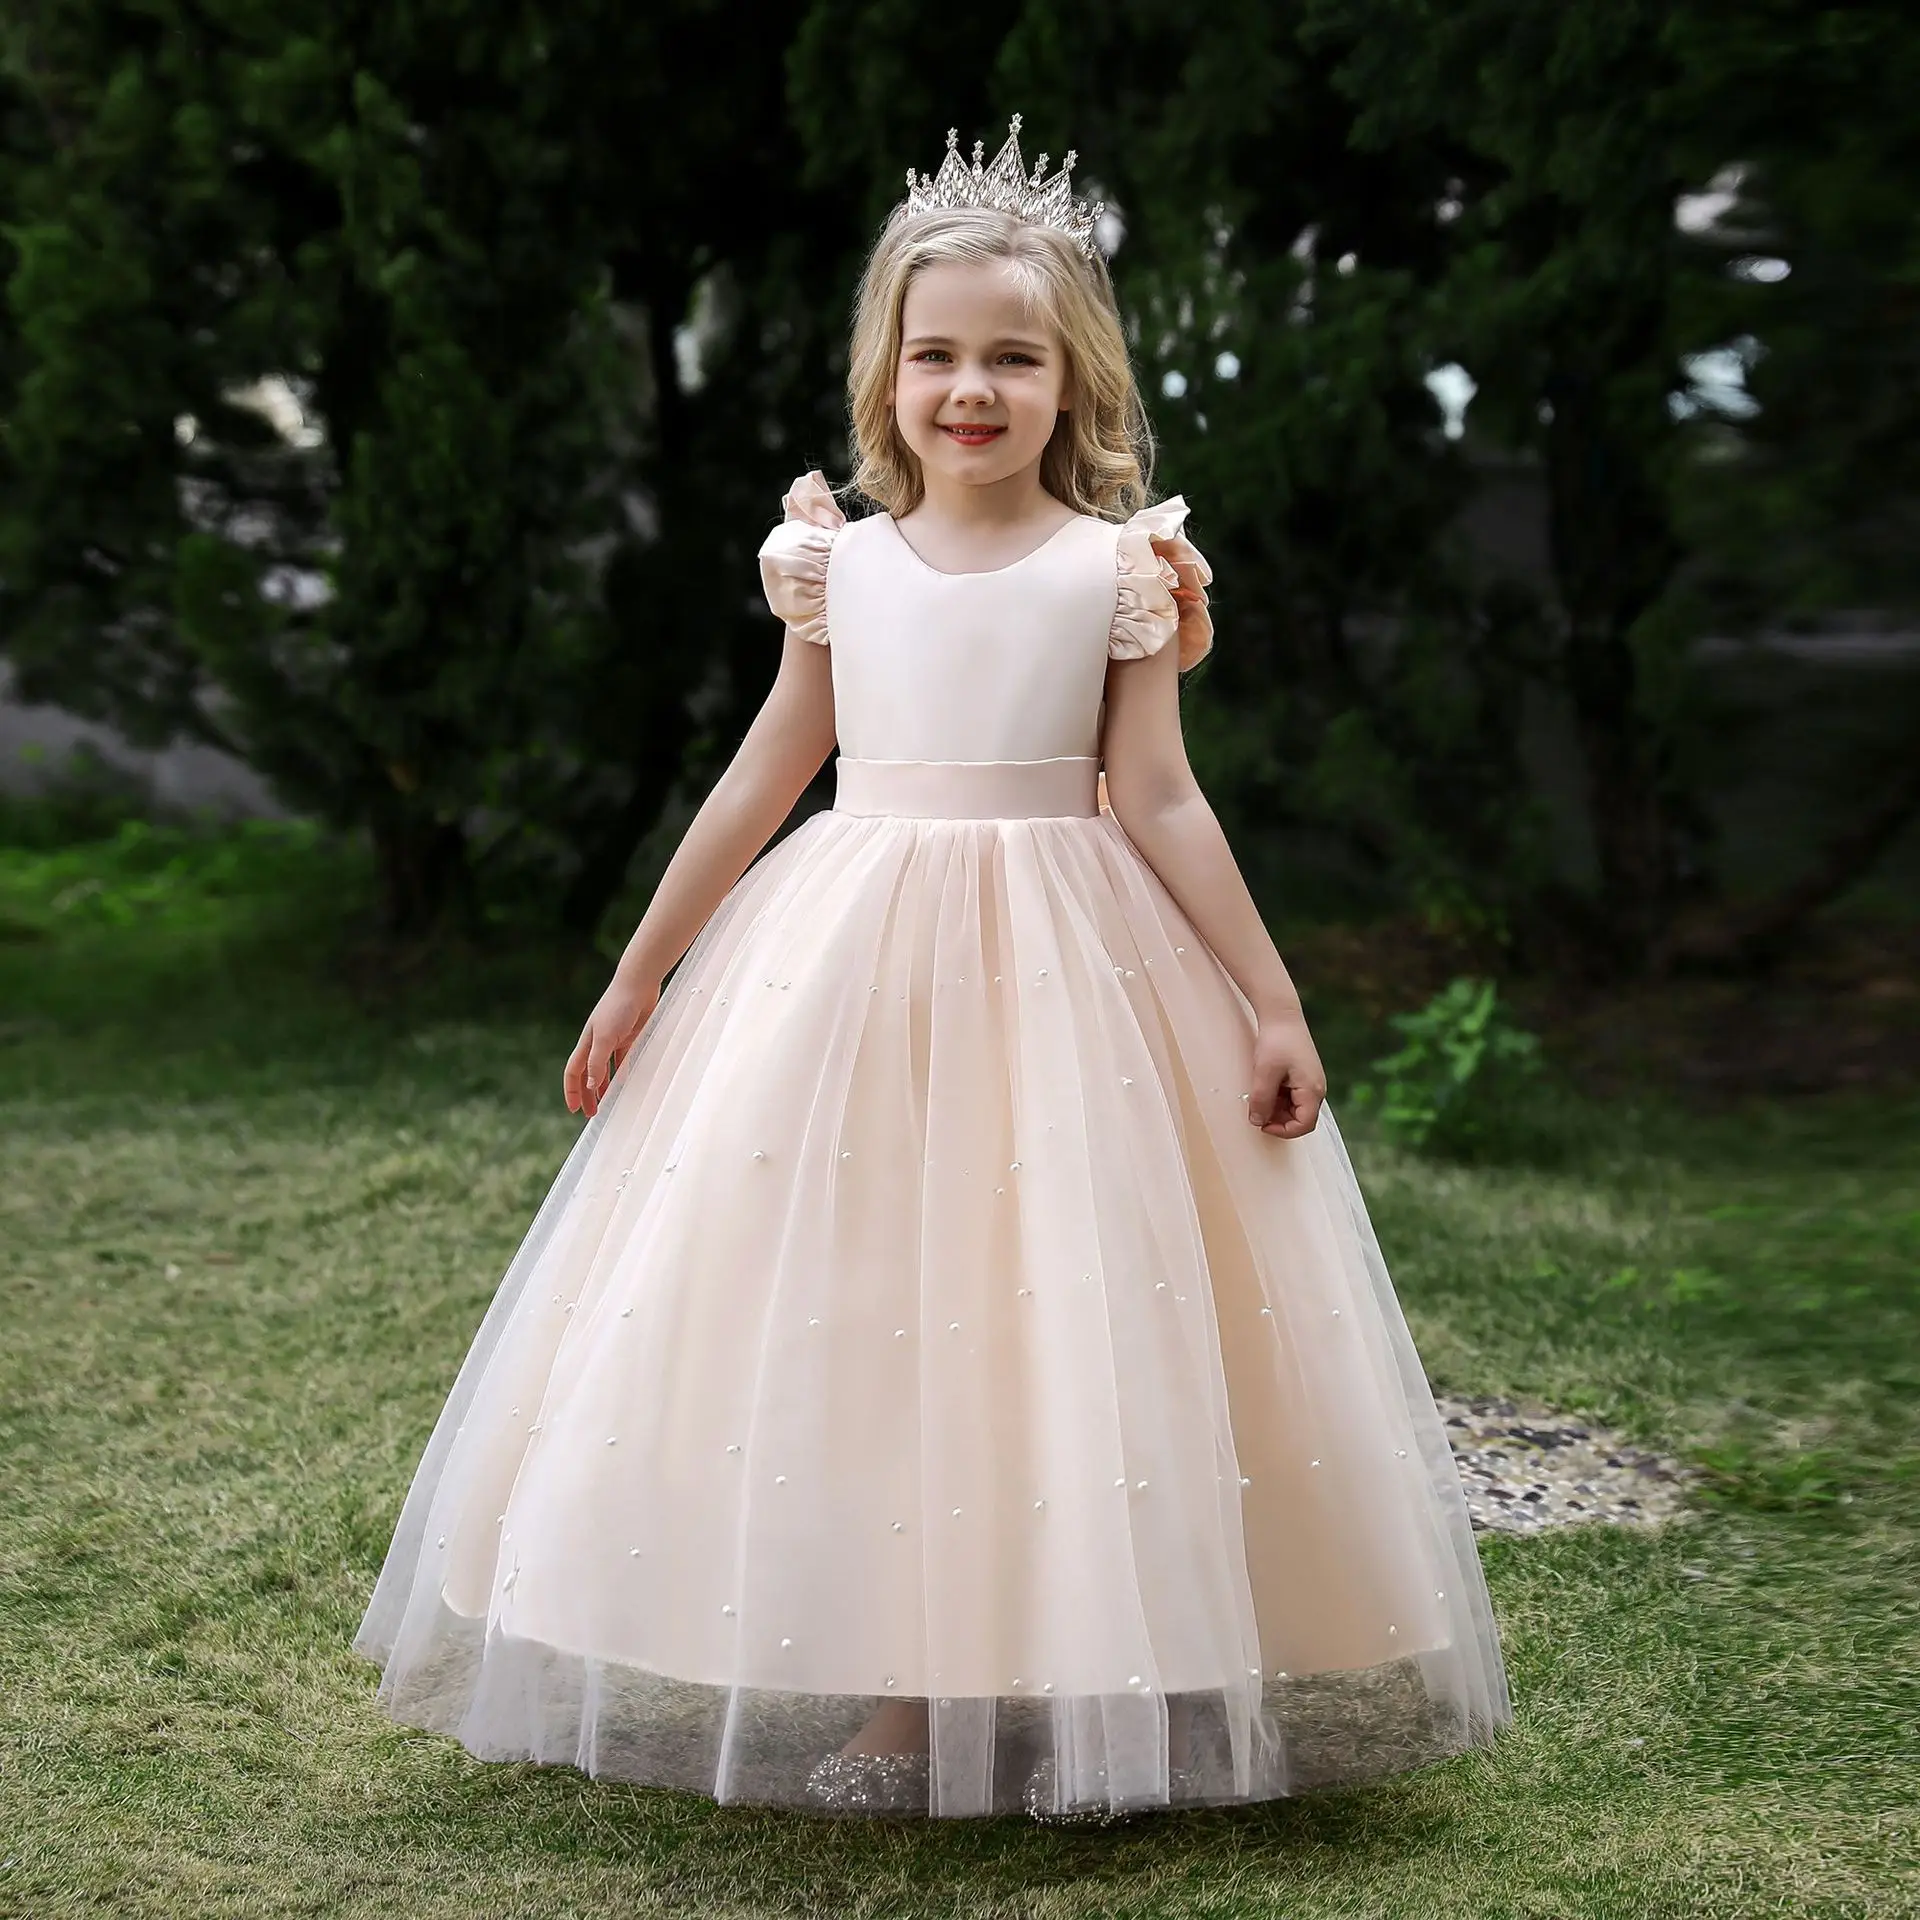 Amazon.com: Gualiy Dress Girl Wedding Party, Ball Gown Dress Girl 4-5 Years  Old Embroidered Tulle Dress with Flower and Tie Waist Dress: Clothing,  Shoes & Jewelry